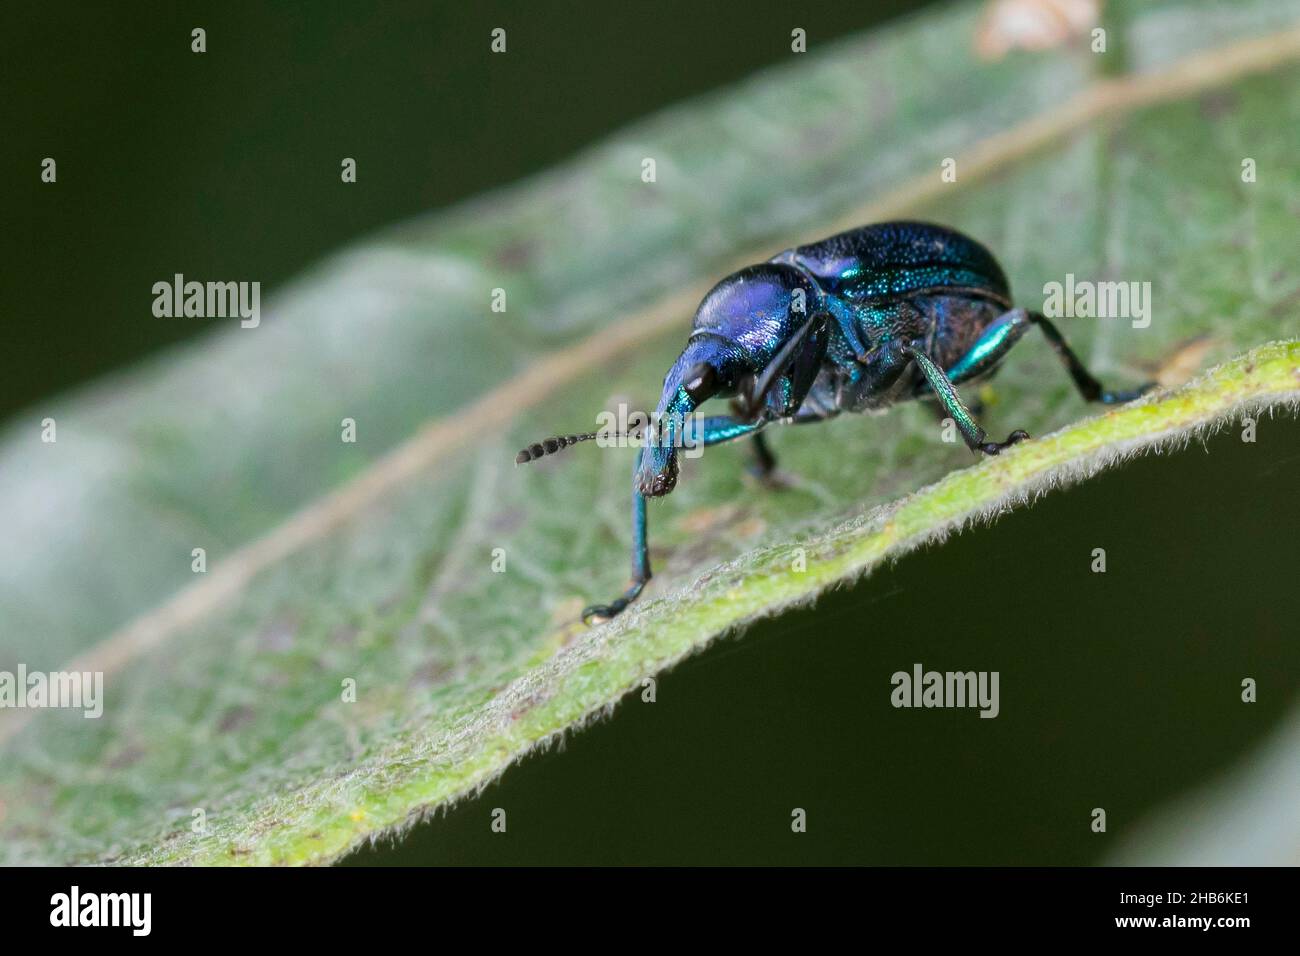 hazel leaf roller weevil (Byctiscus betulae), on withered leaf, Germany Stock Photo